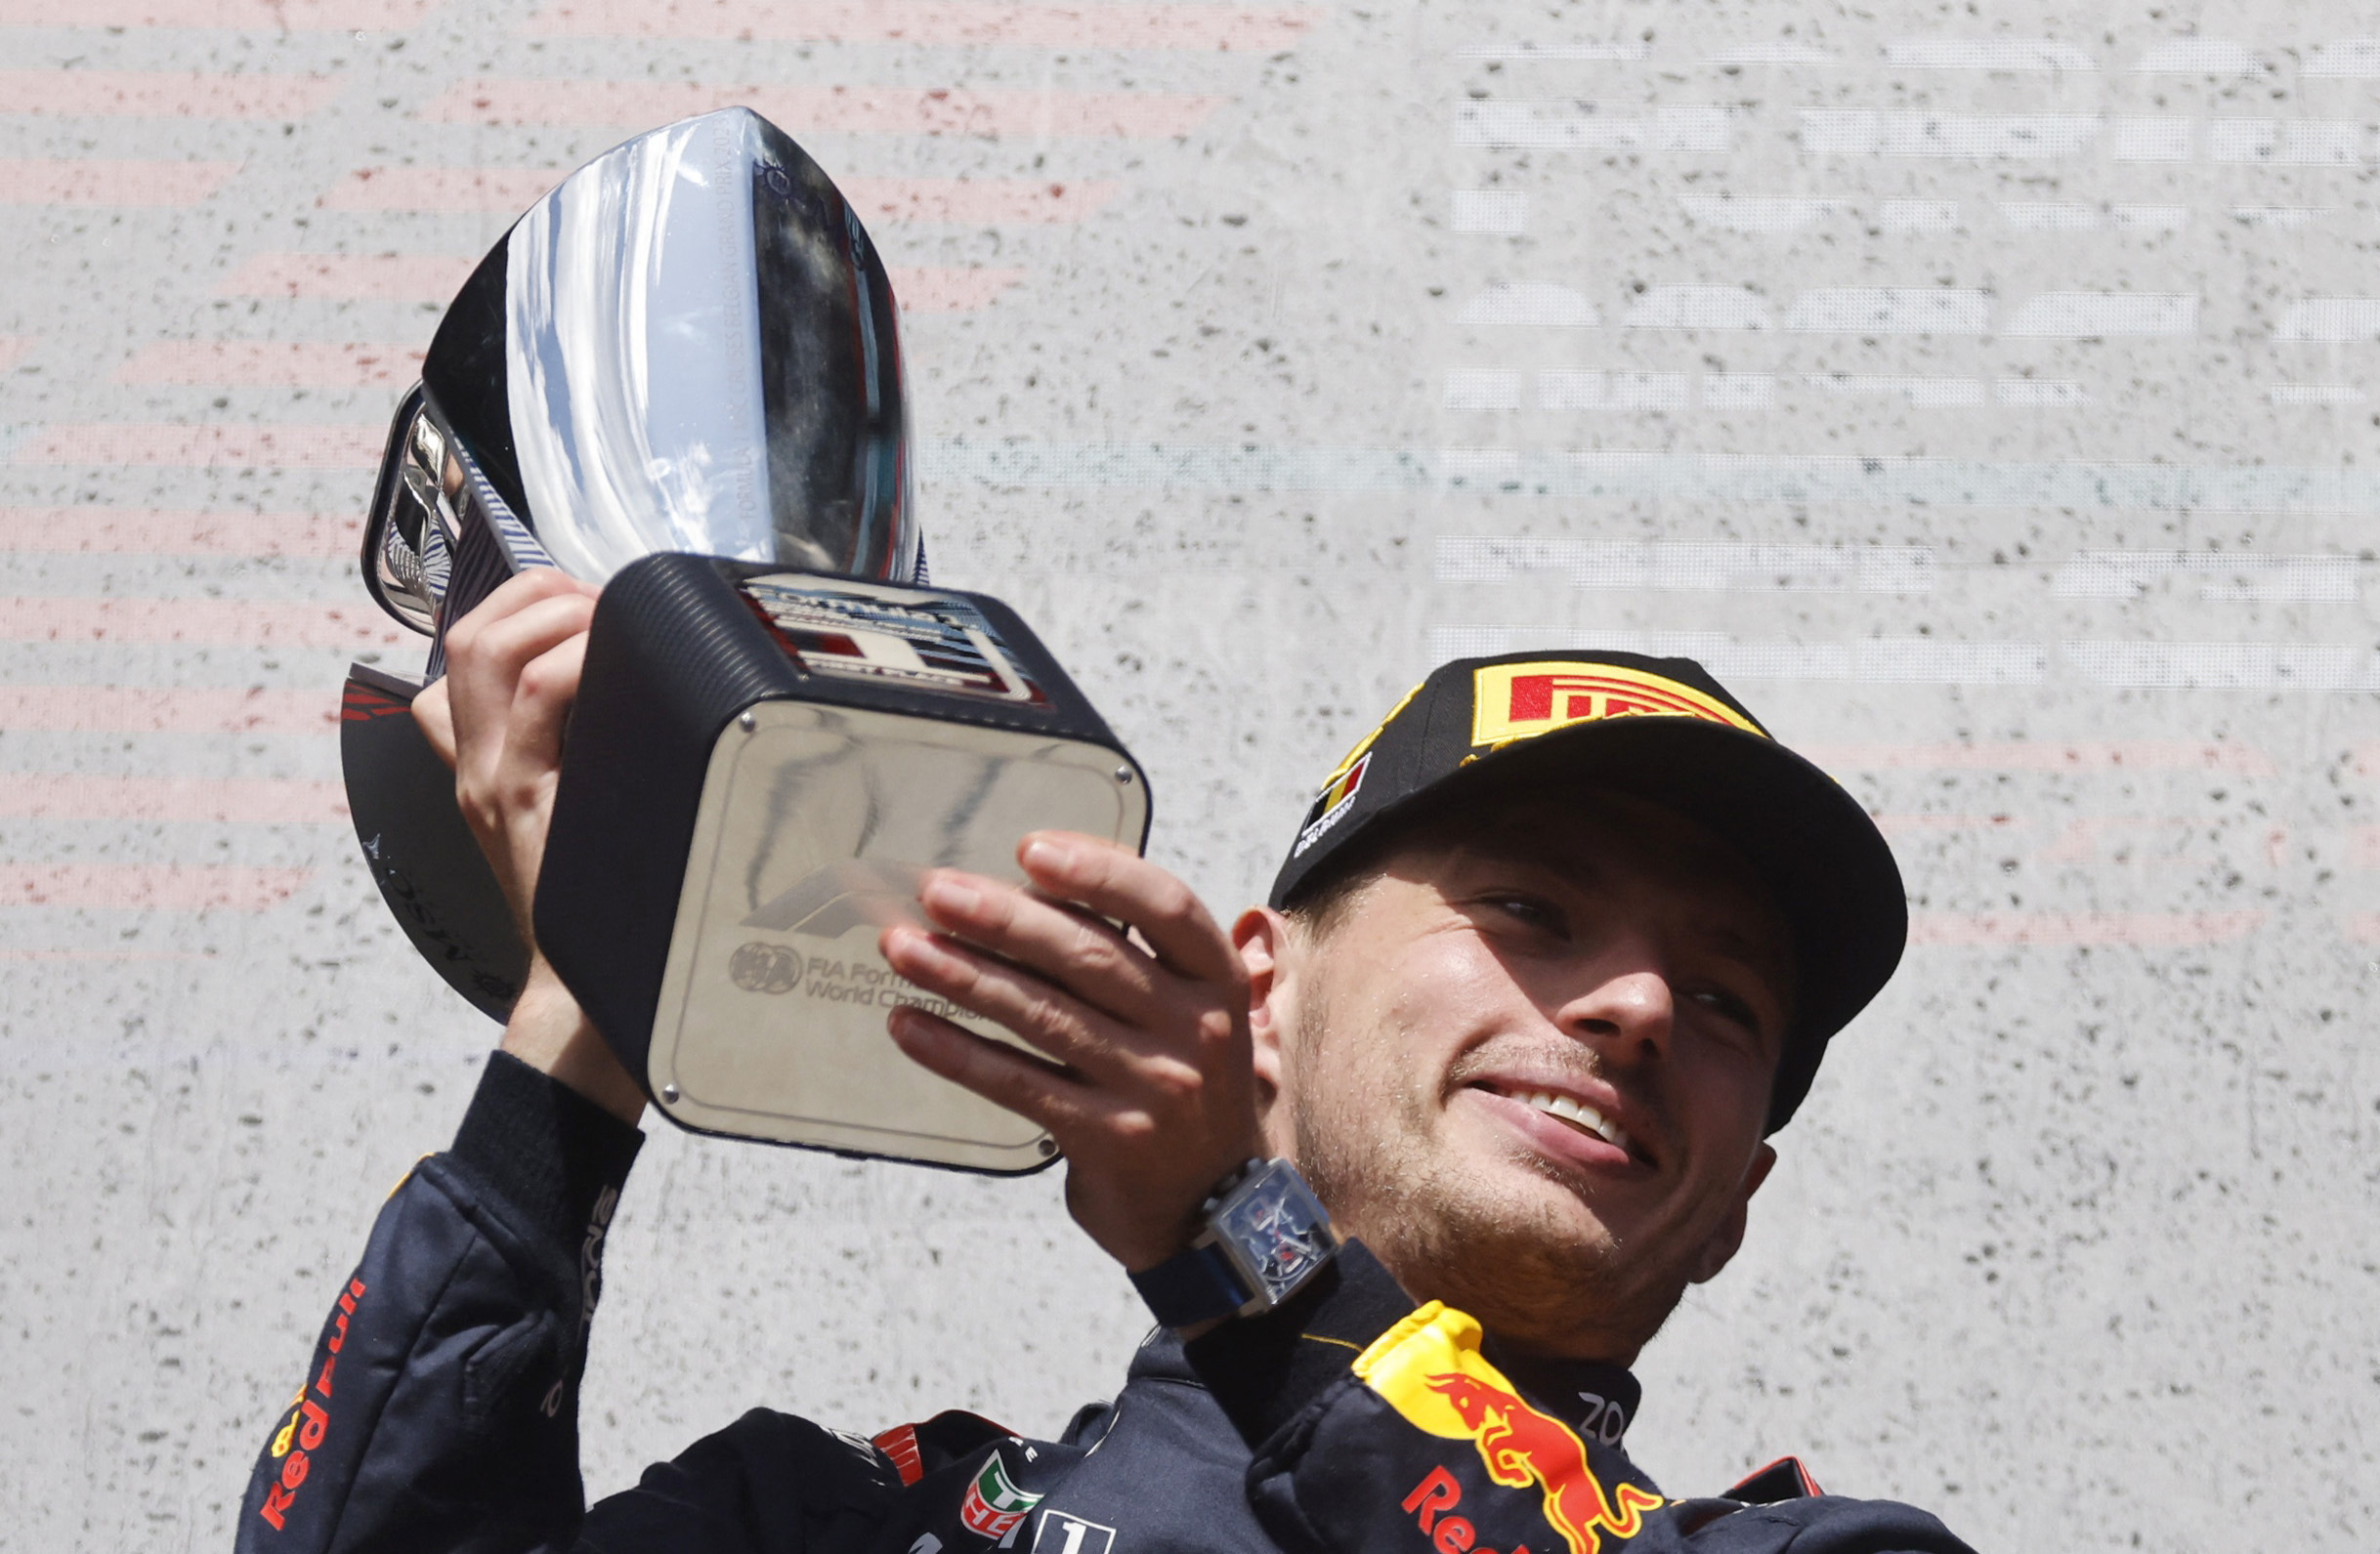 Does anyone know why the new French GP trophies don't have the